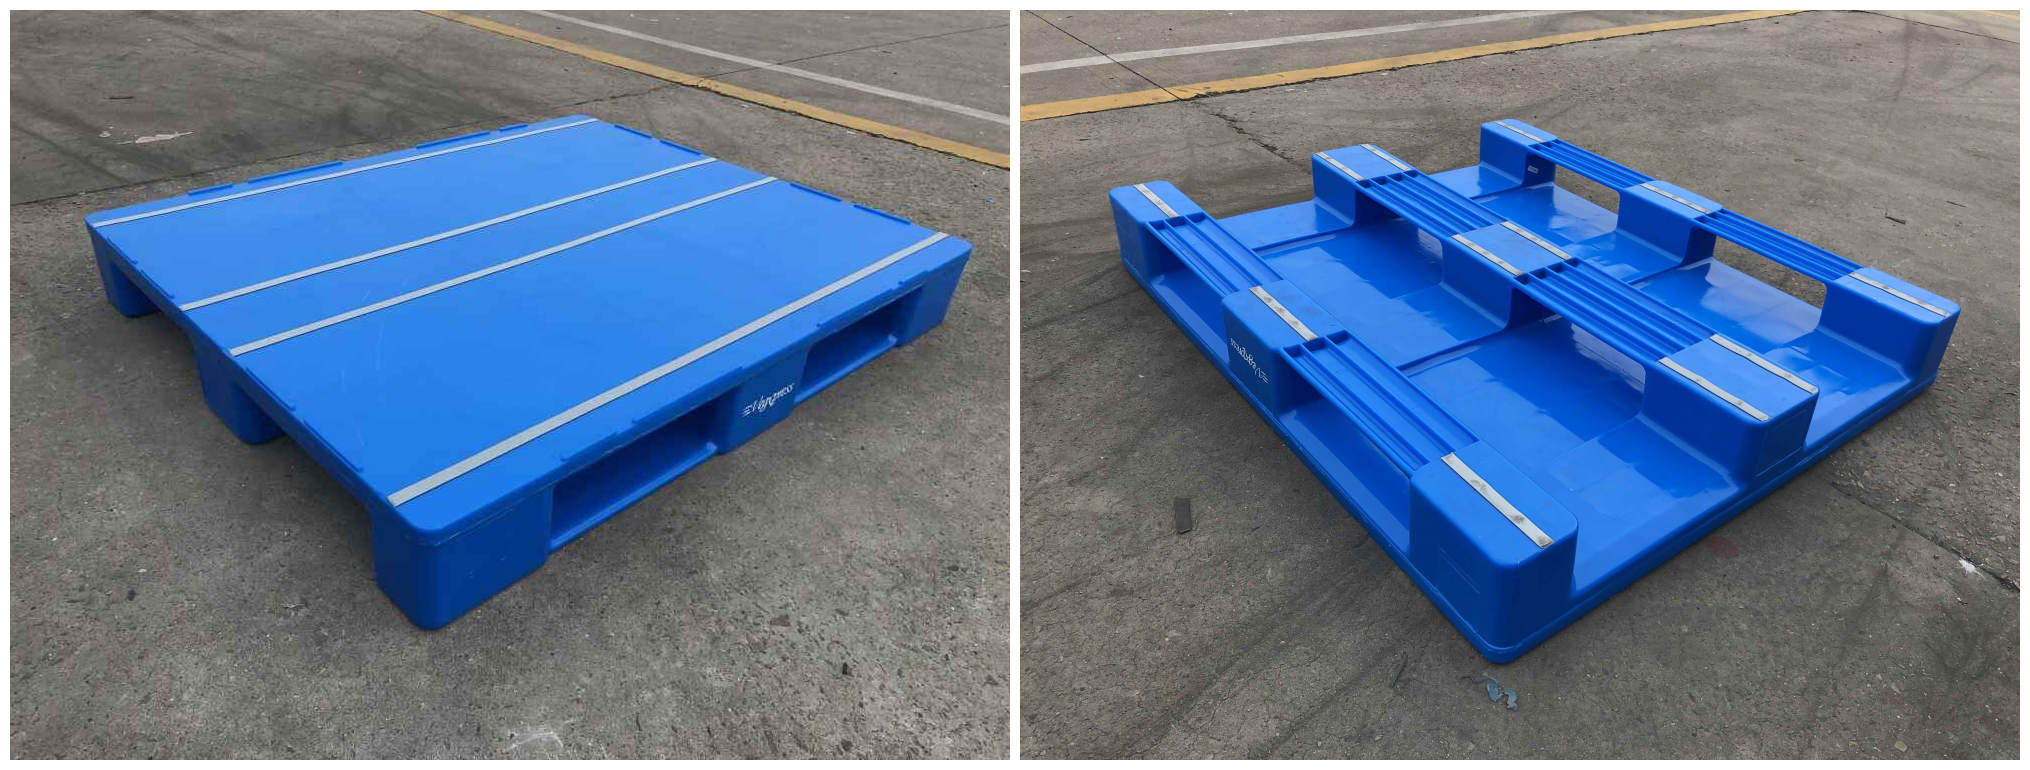 Solid surface plastic pallet